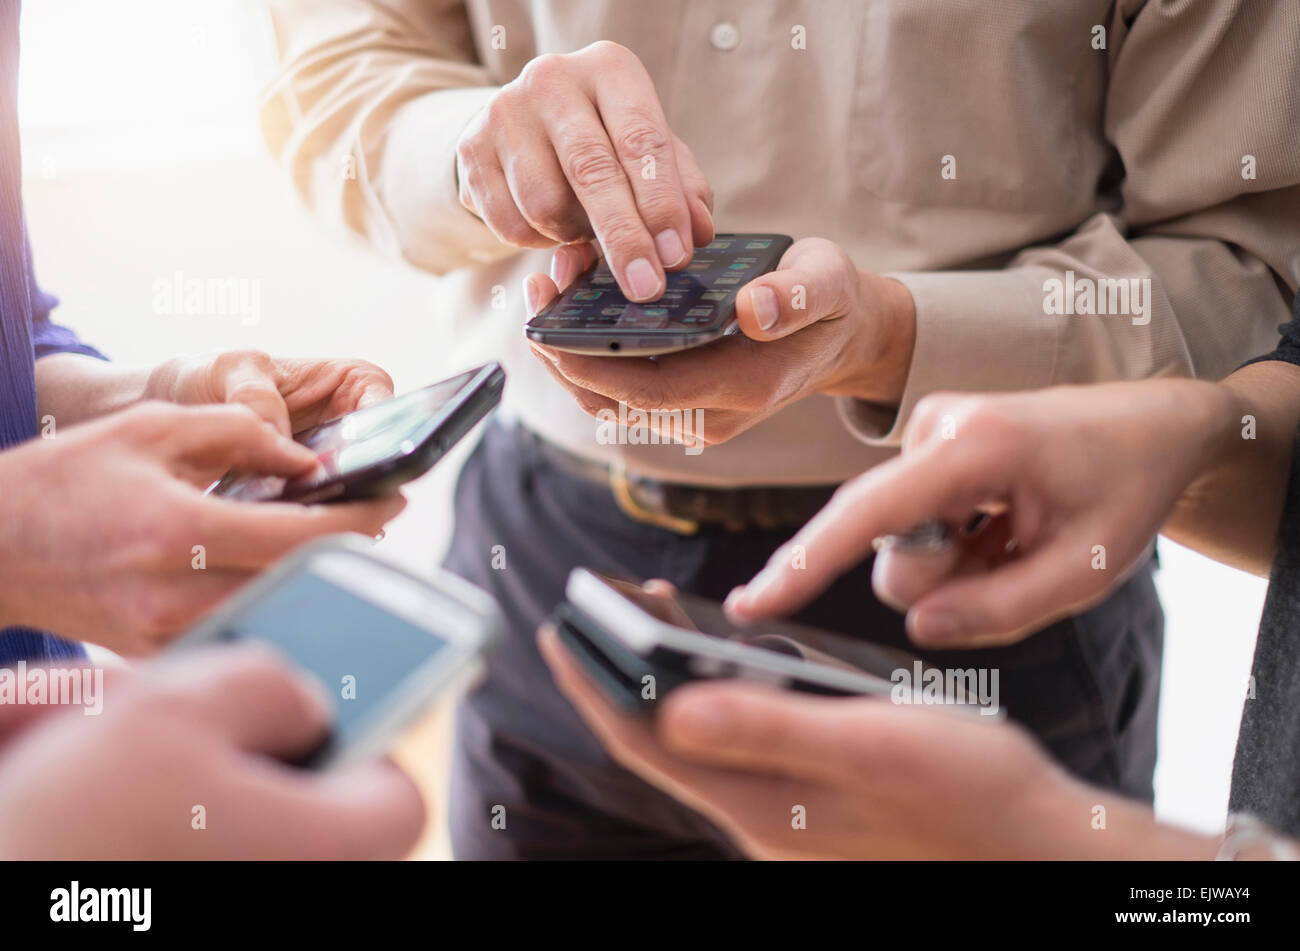 Close up of hands of men and women using smartphones together Stock Photo